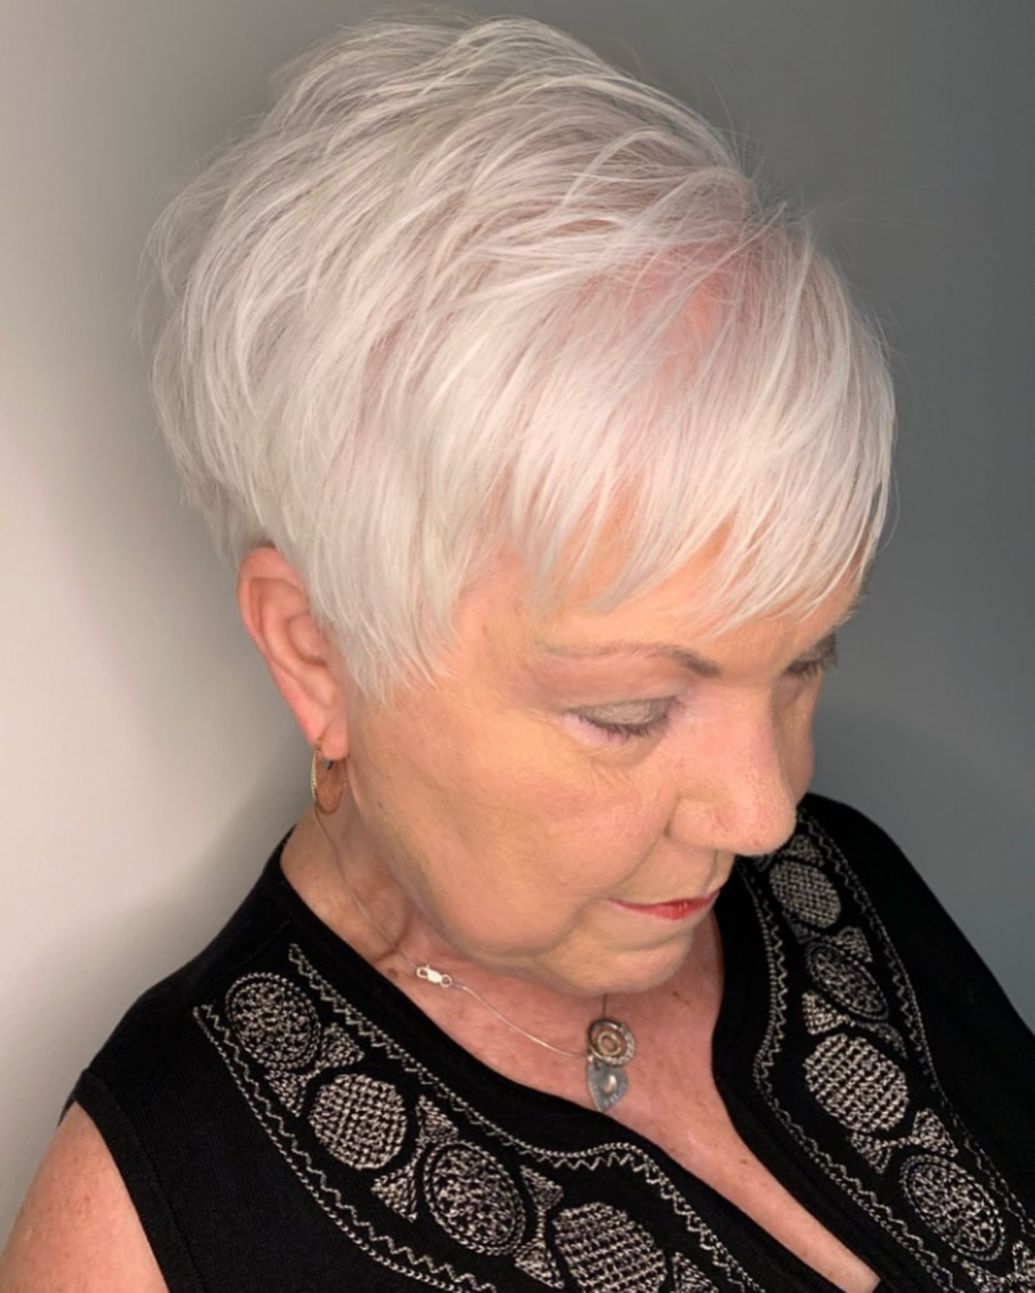 Feathered pixie haircut 2